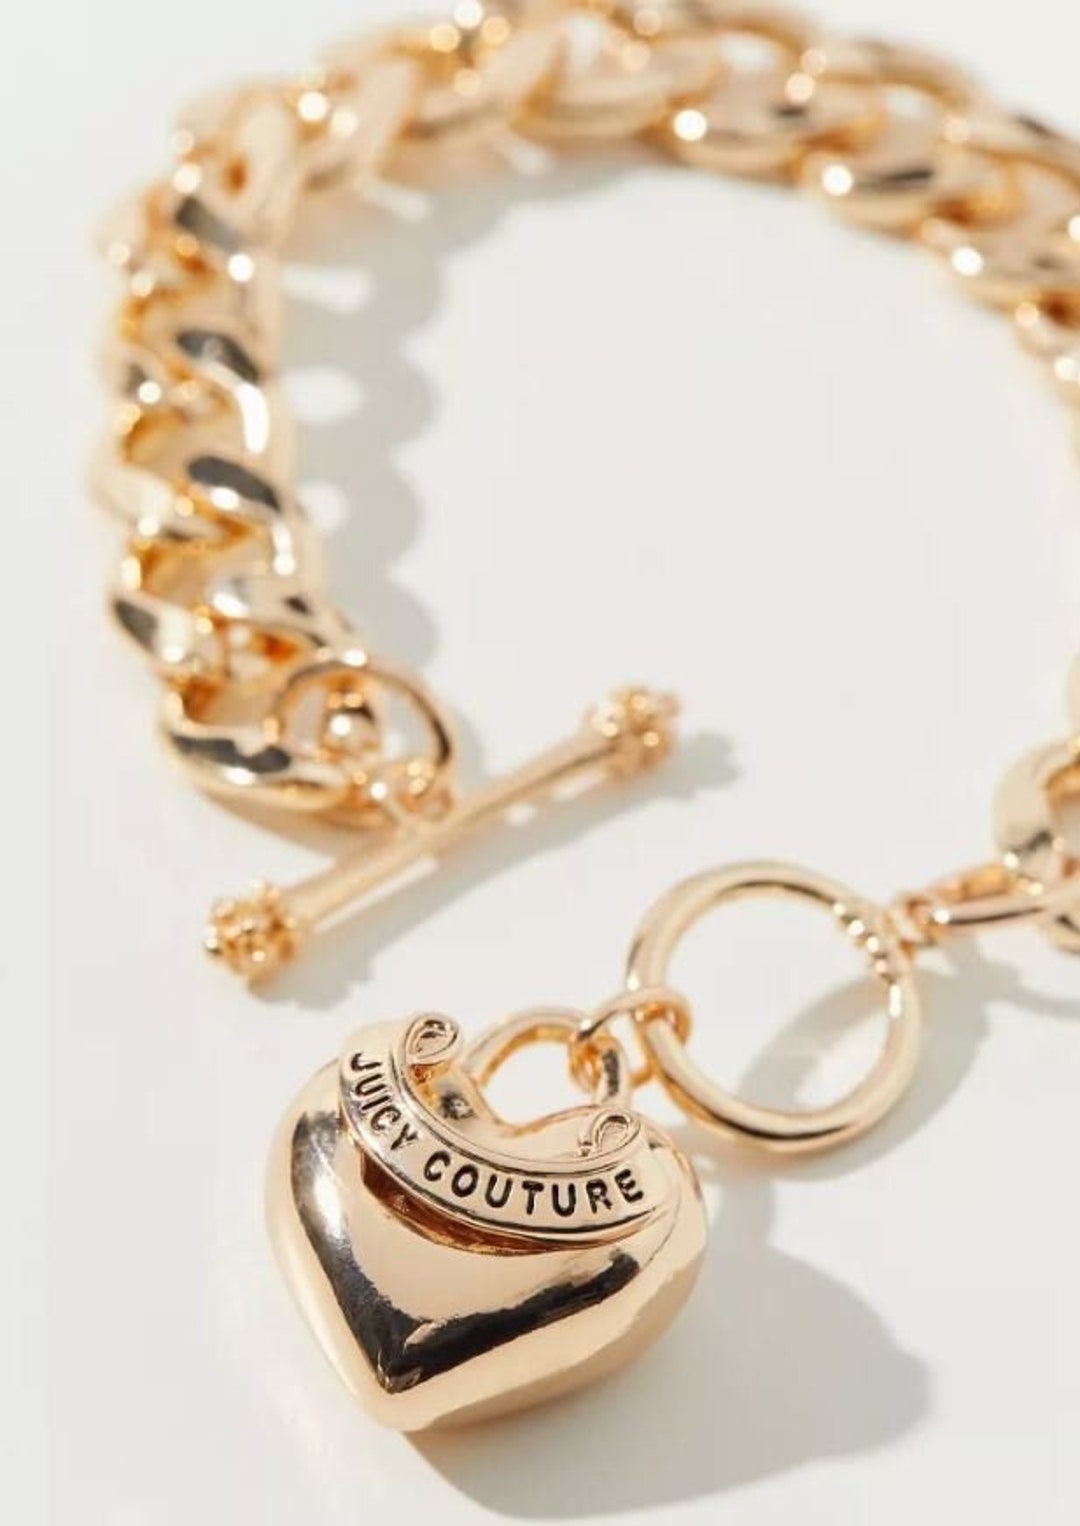 Juicy Couture Black Label Women's Swarovski Crystal Accented Rose Gold-Tone  Charm Bracelet Watch : Amazon.in: Fashion